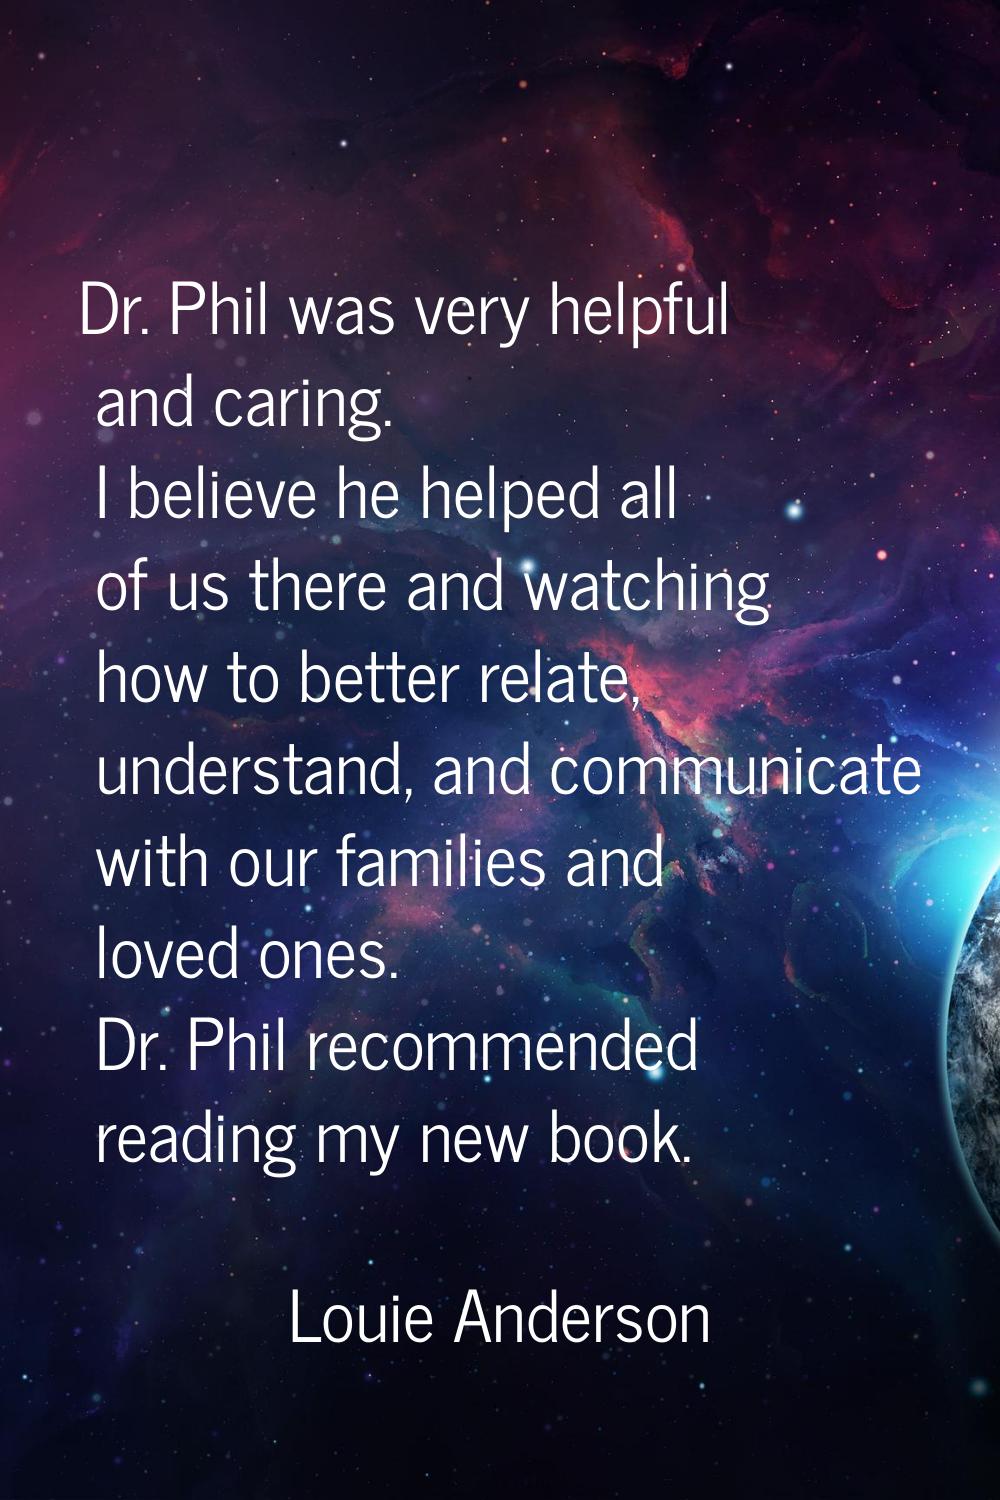 Dr. Phil was very helpful and caring. I believe he helped all of us there and watching how to bette